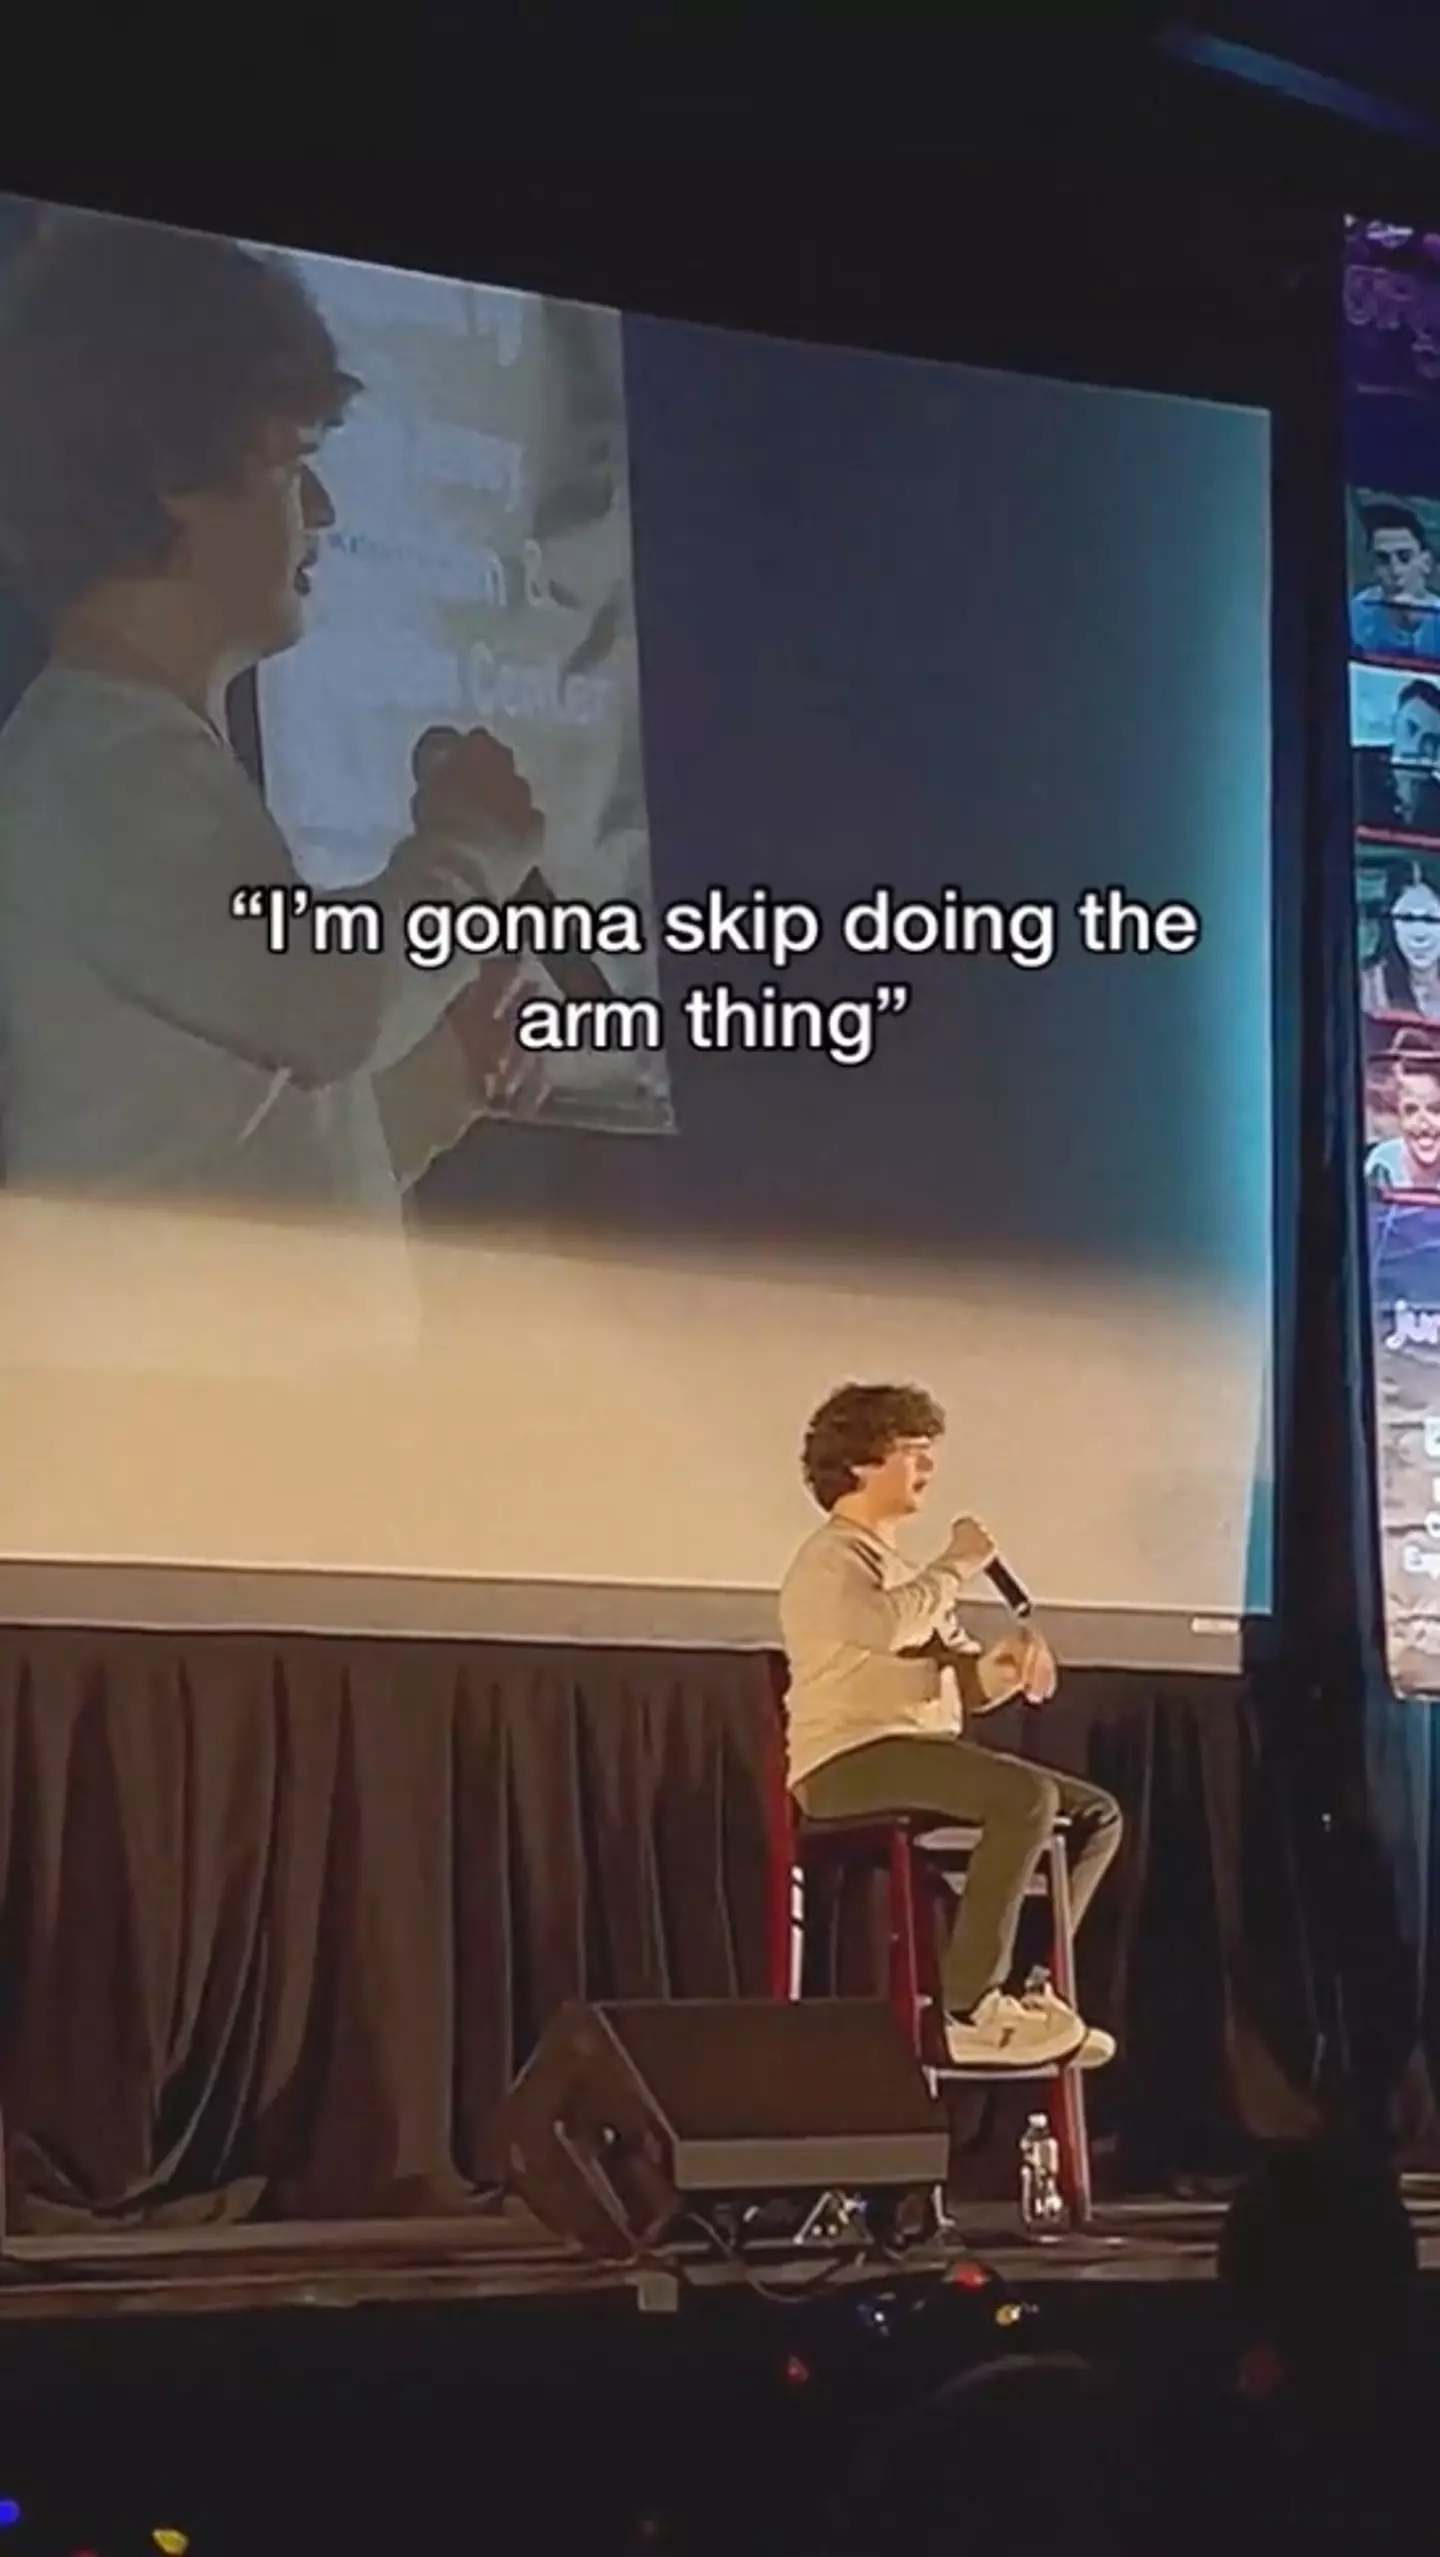 Stranger Things star Gaten Matarazzo says doctors have warned that his famous arm trick could have caused his spine condition.